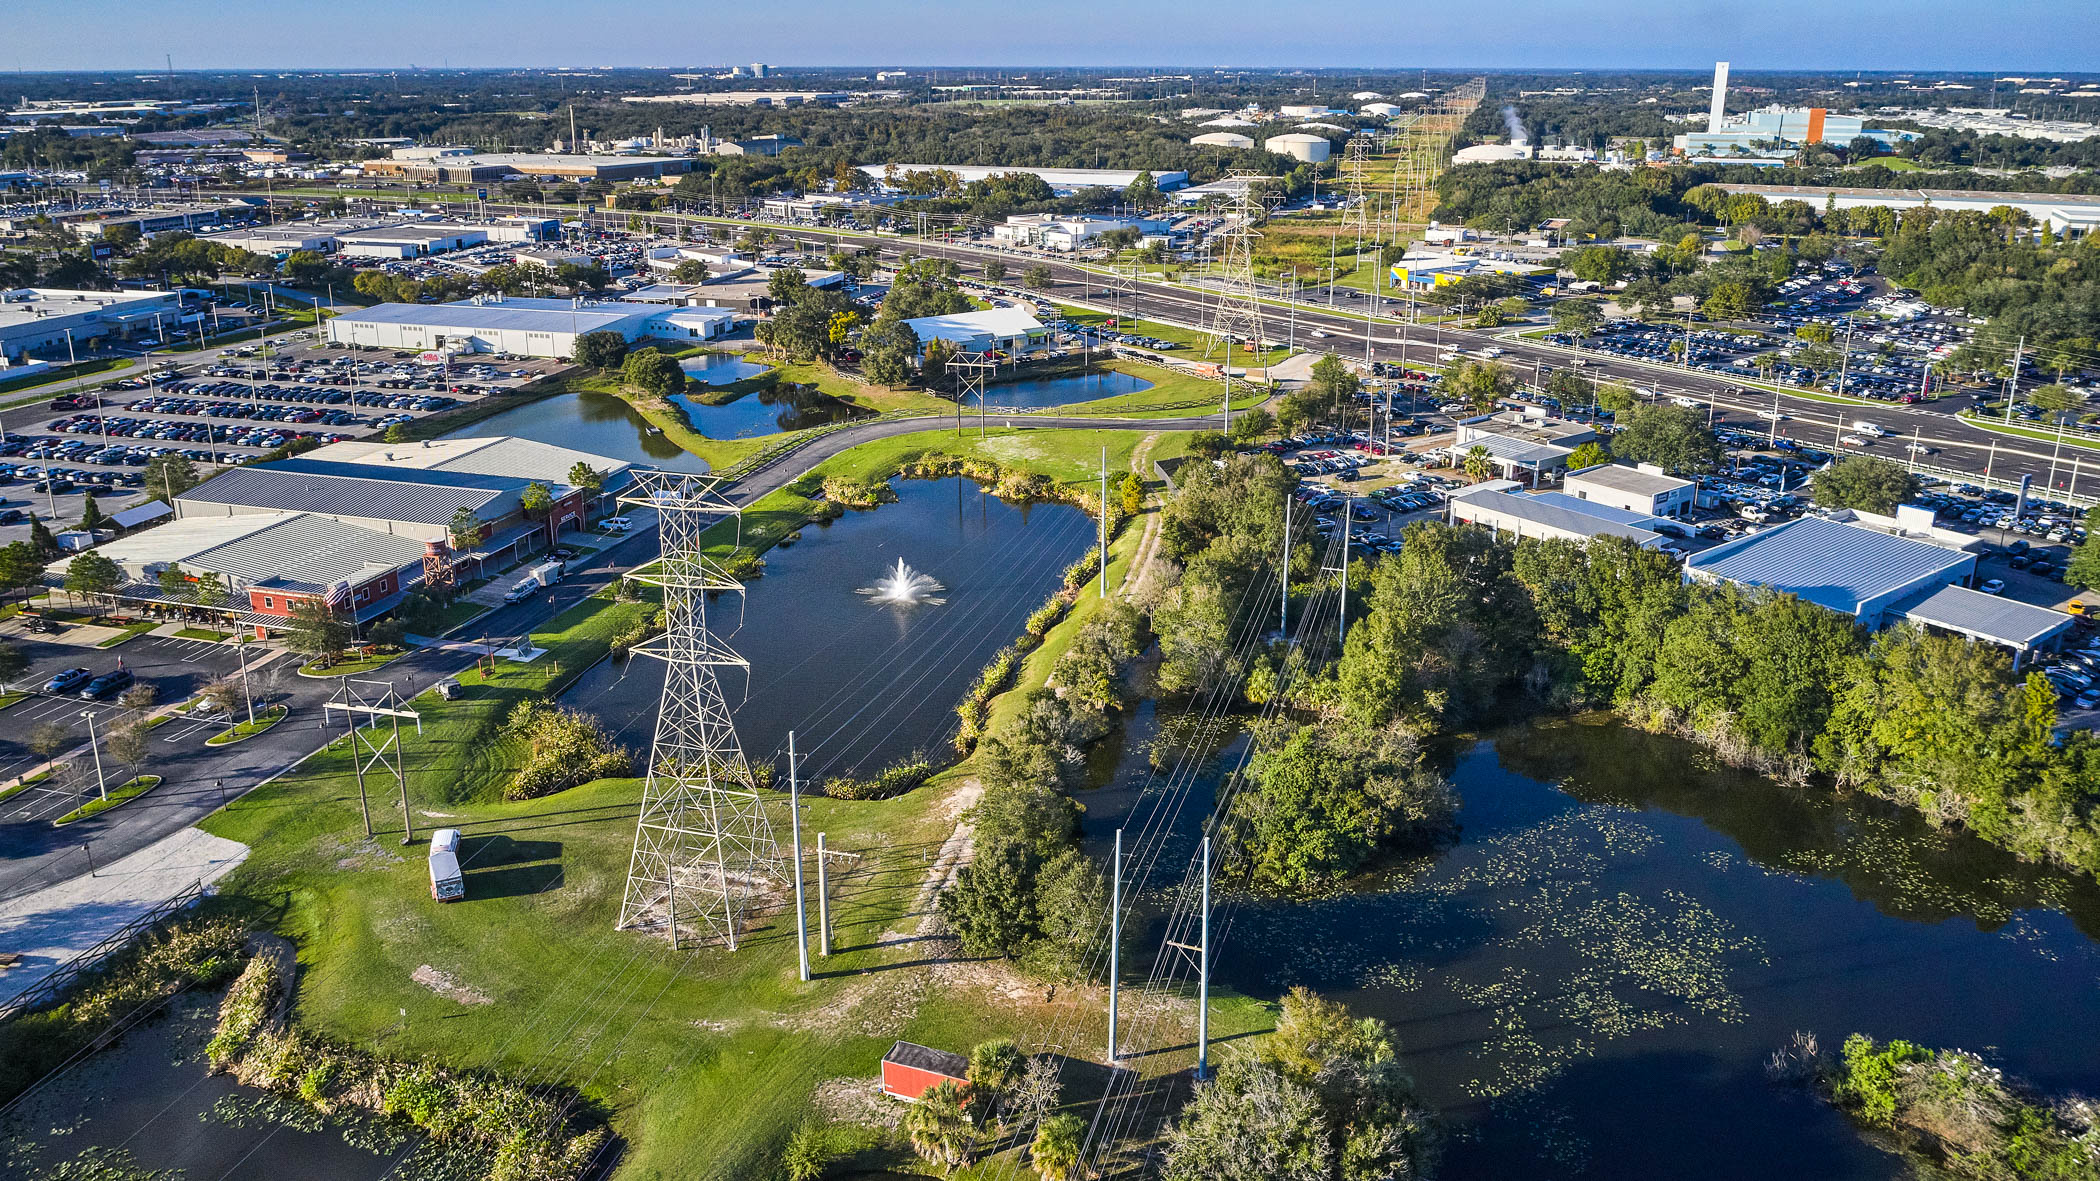 Transmission Towers Photographed with Drone in Tampa